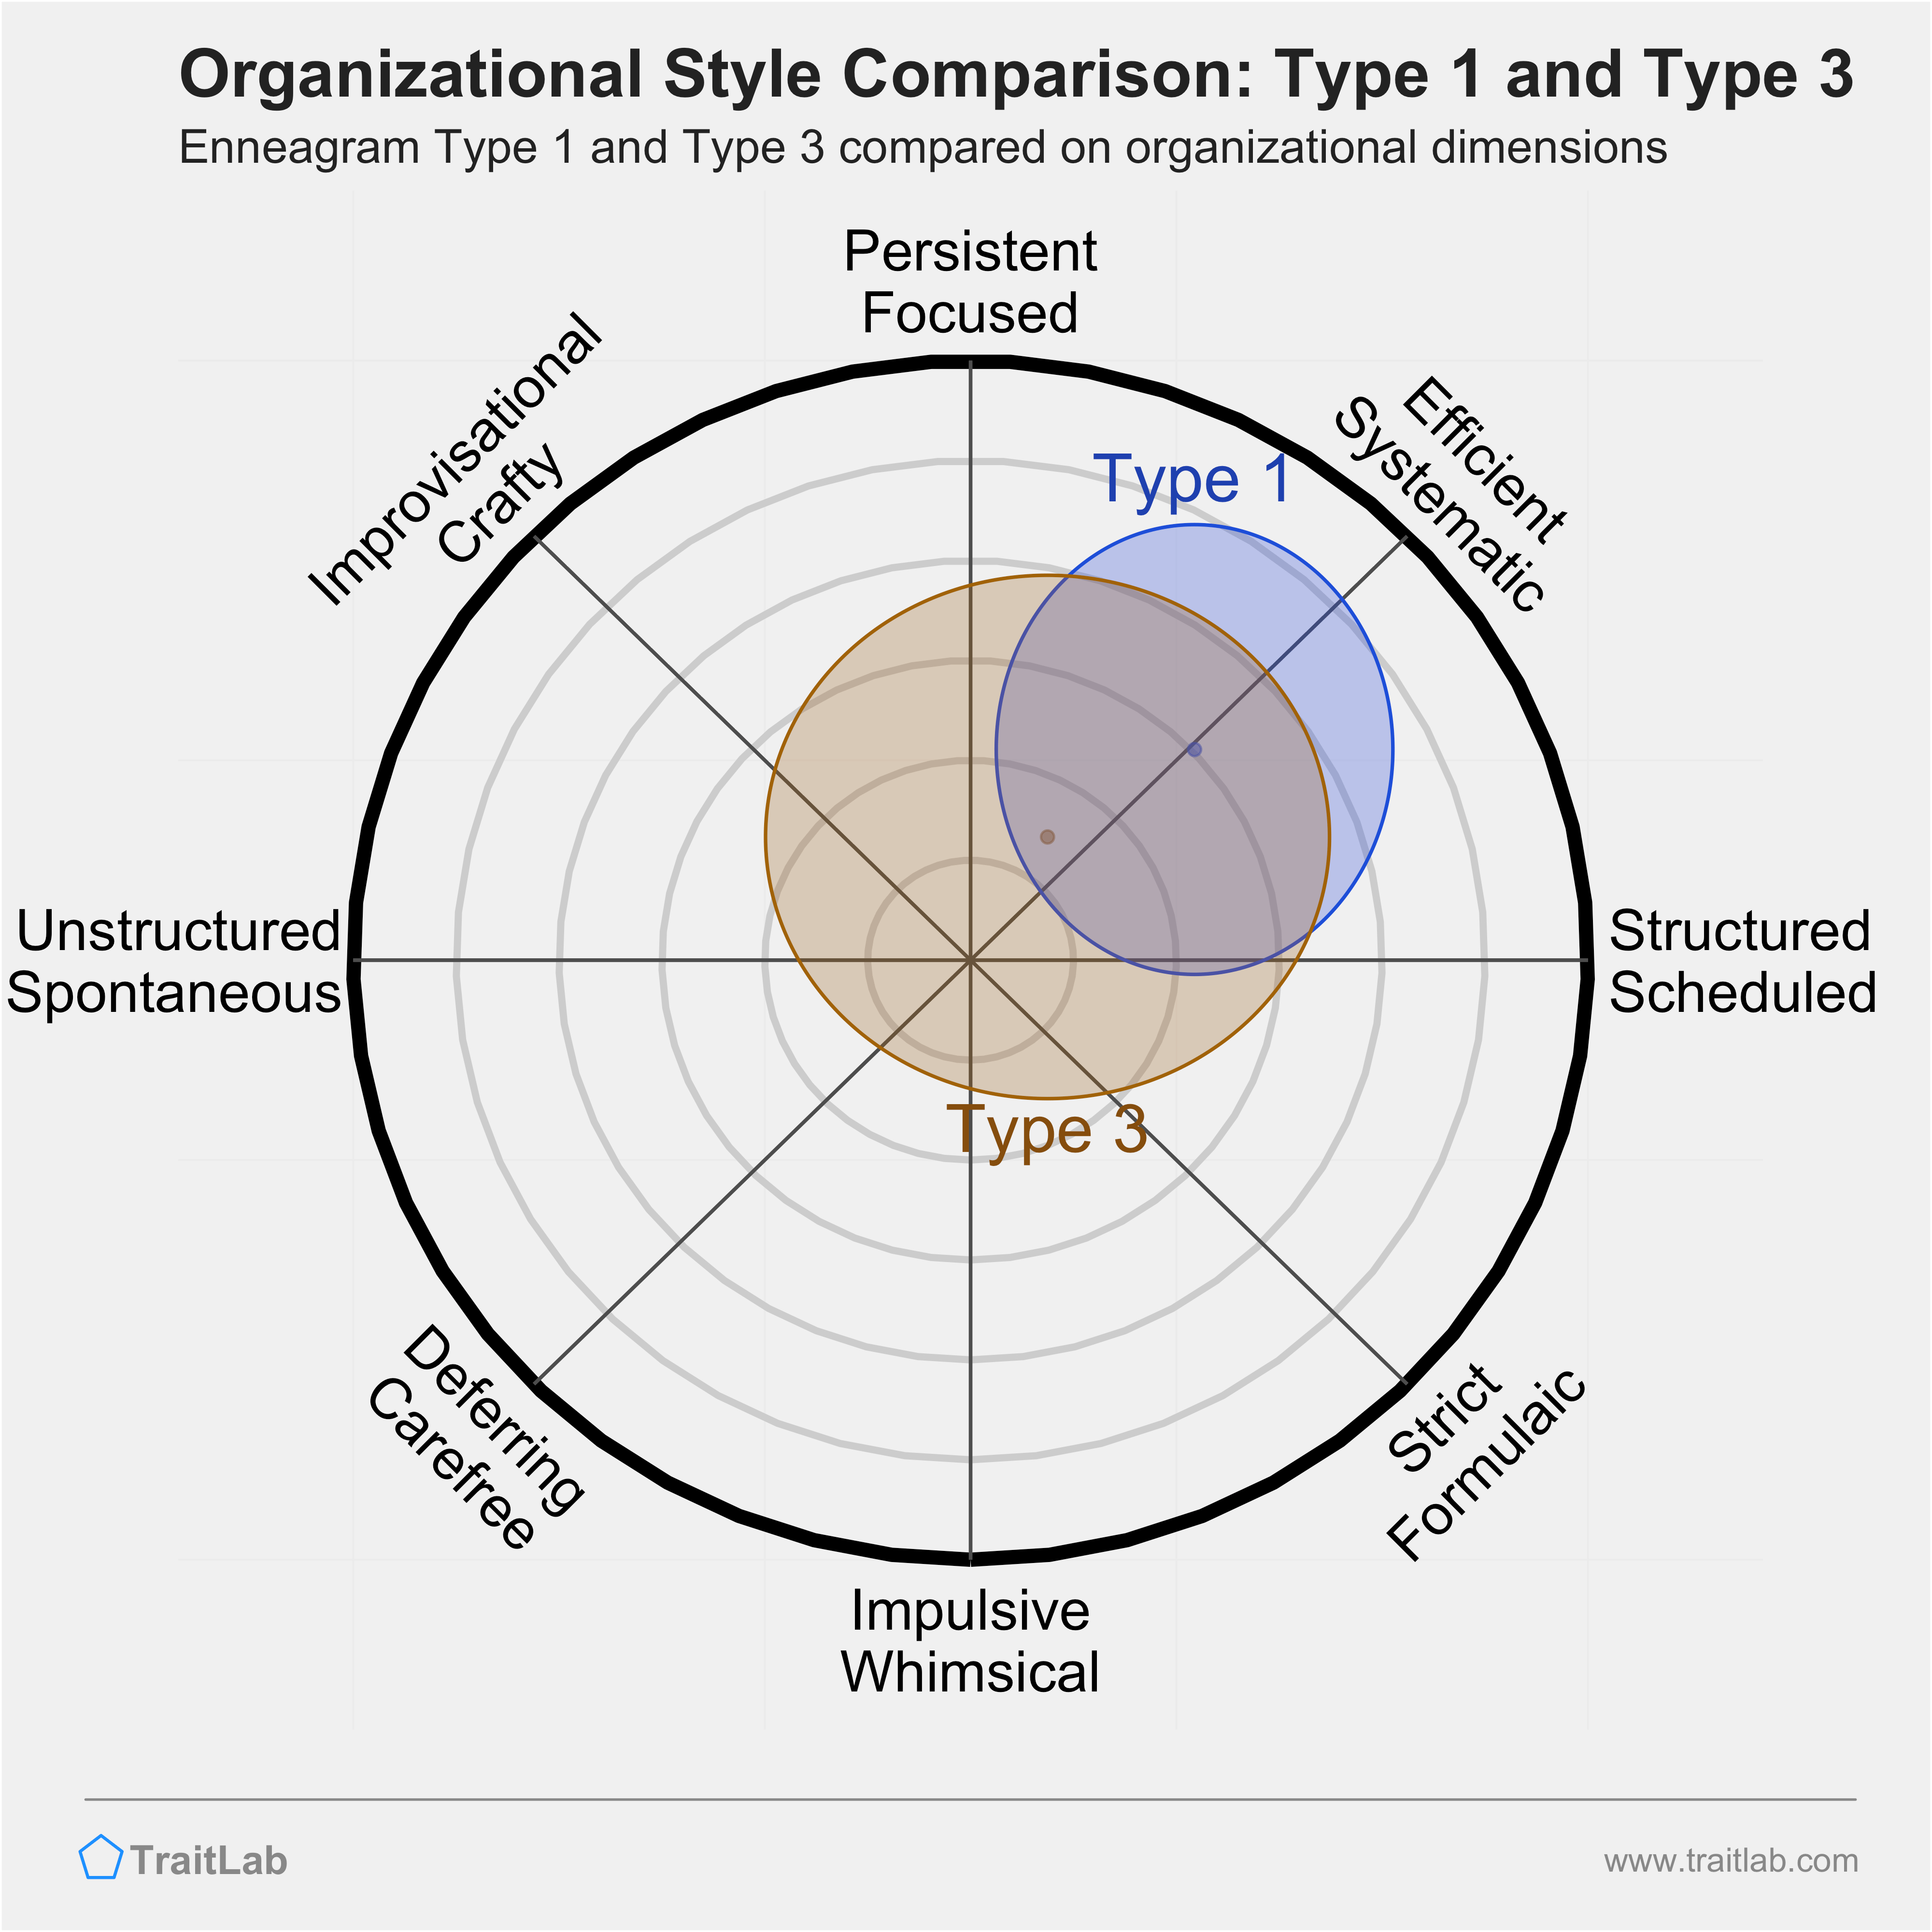 Type 1 and Type 3 comparison across organizational dimensions